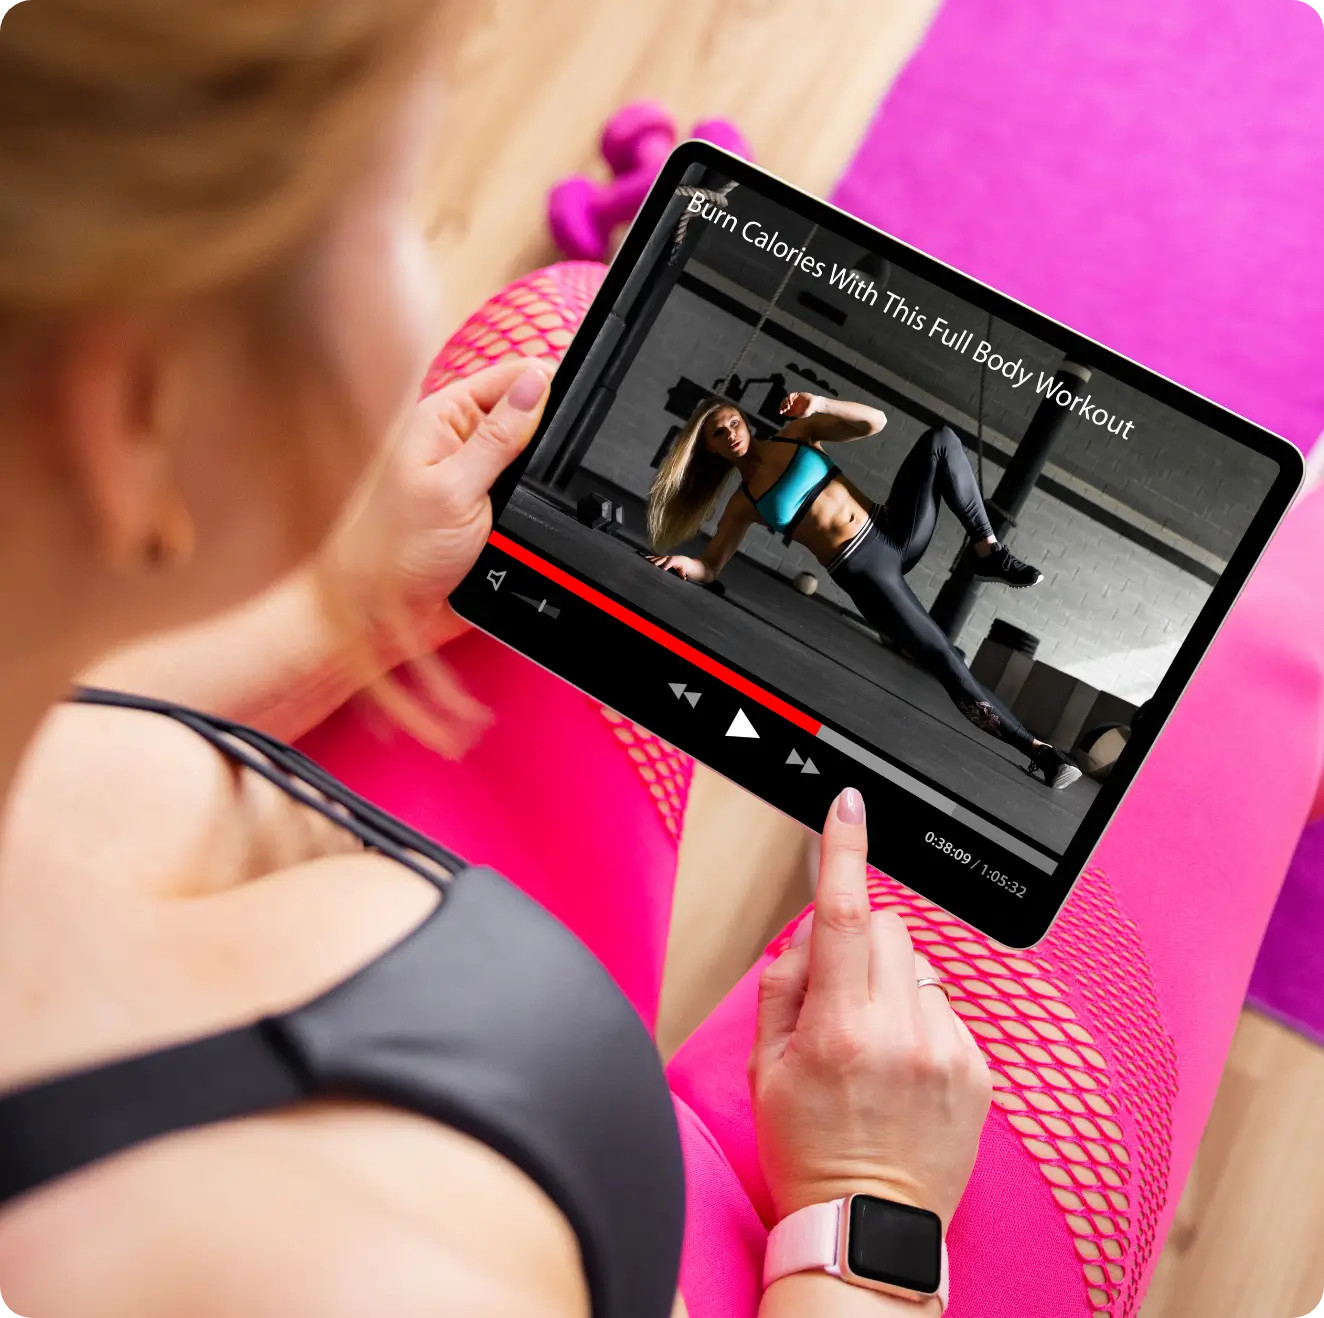 Gym software to create customized gym video playlists